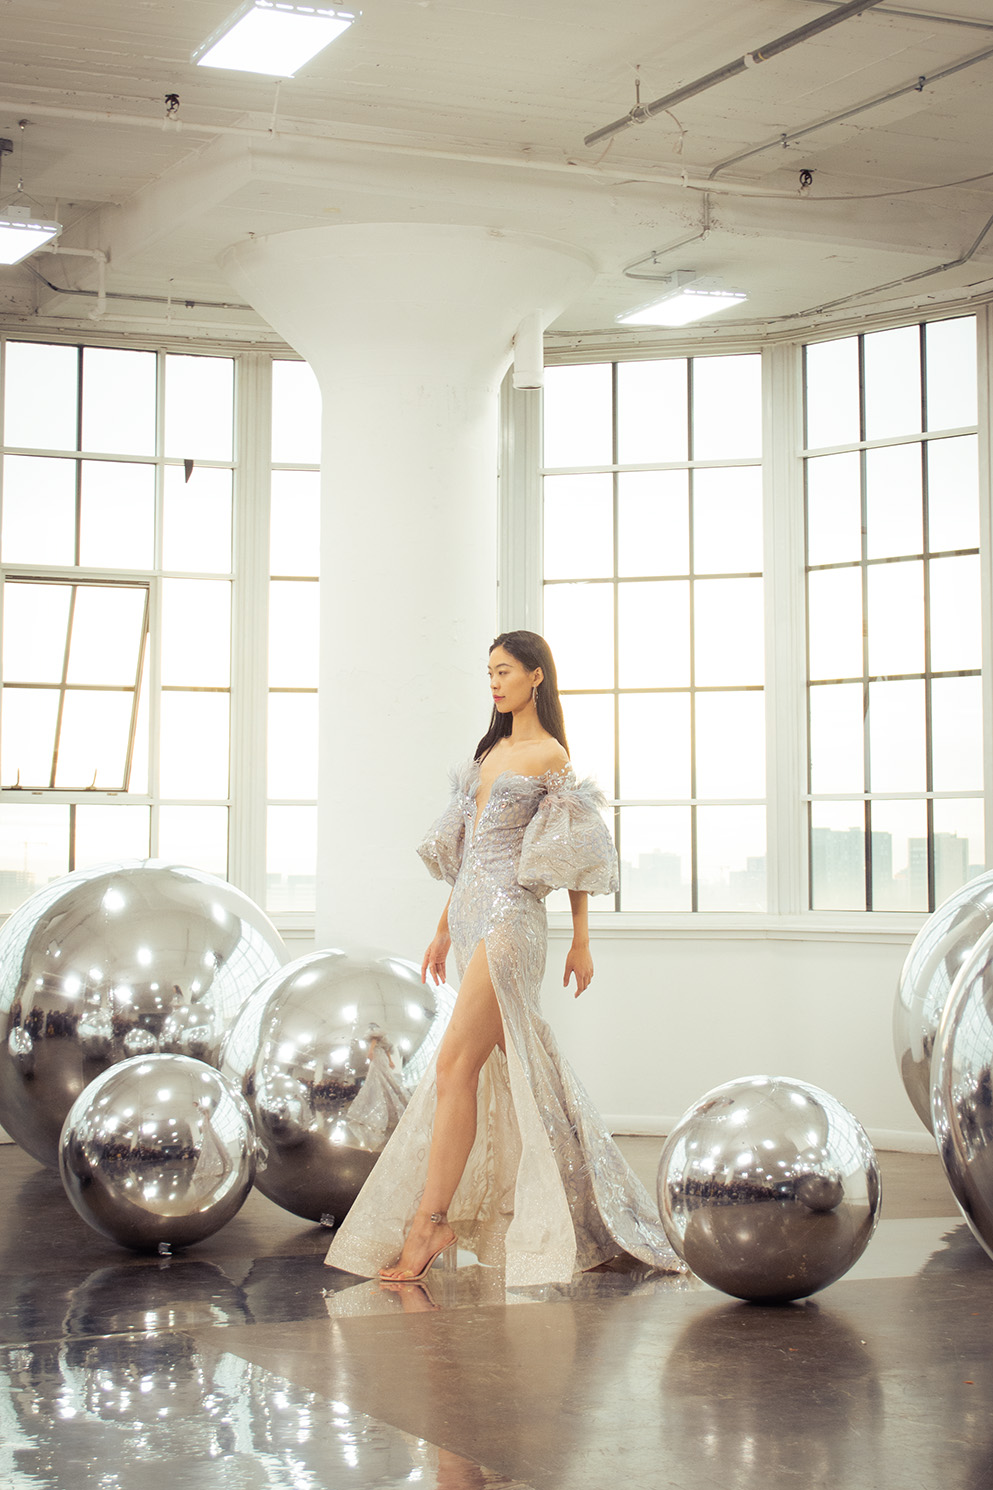 A model wearing a silver maxi dress with puffed sleeves walks between metallic spheres on the ground.